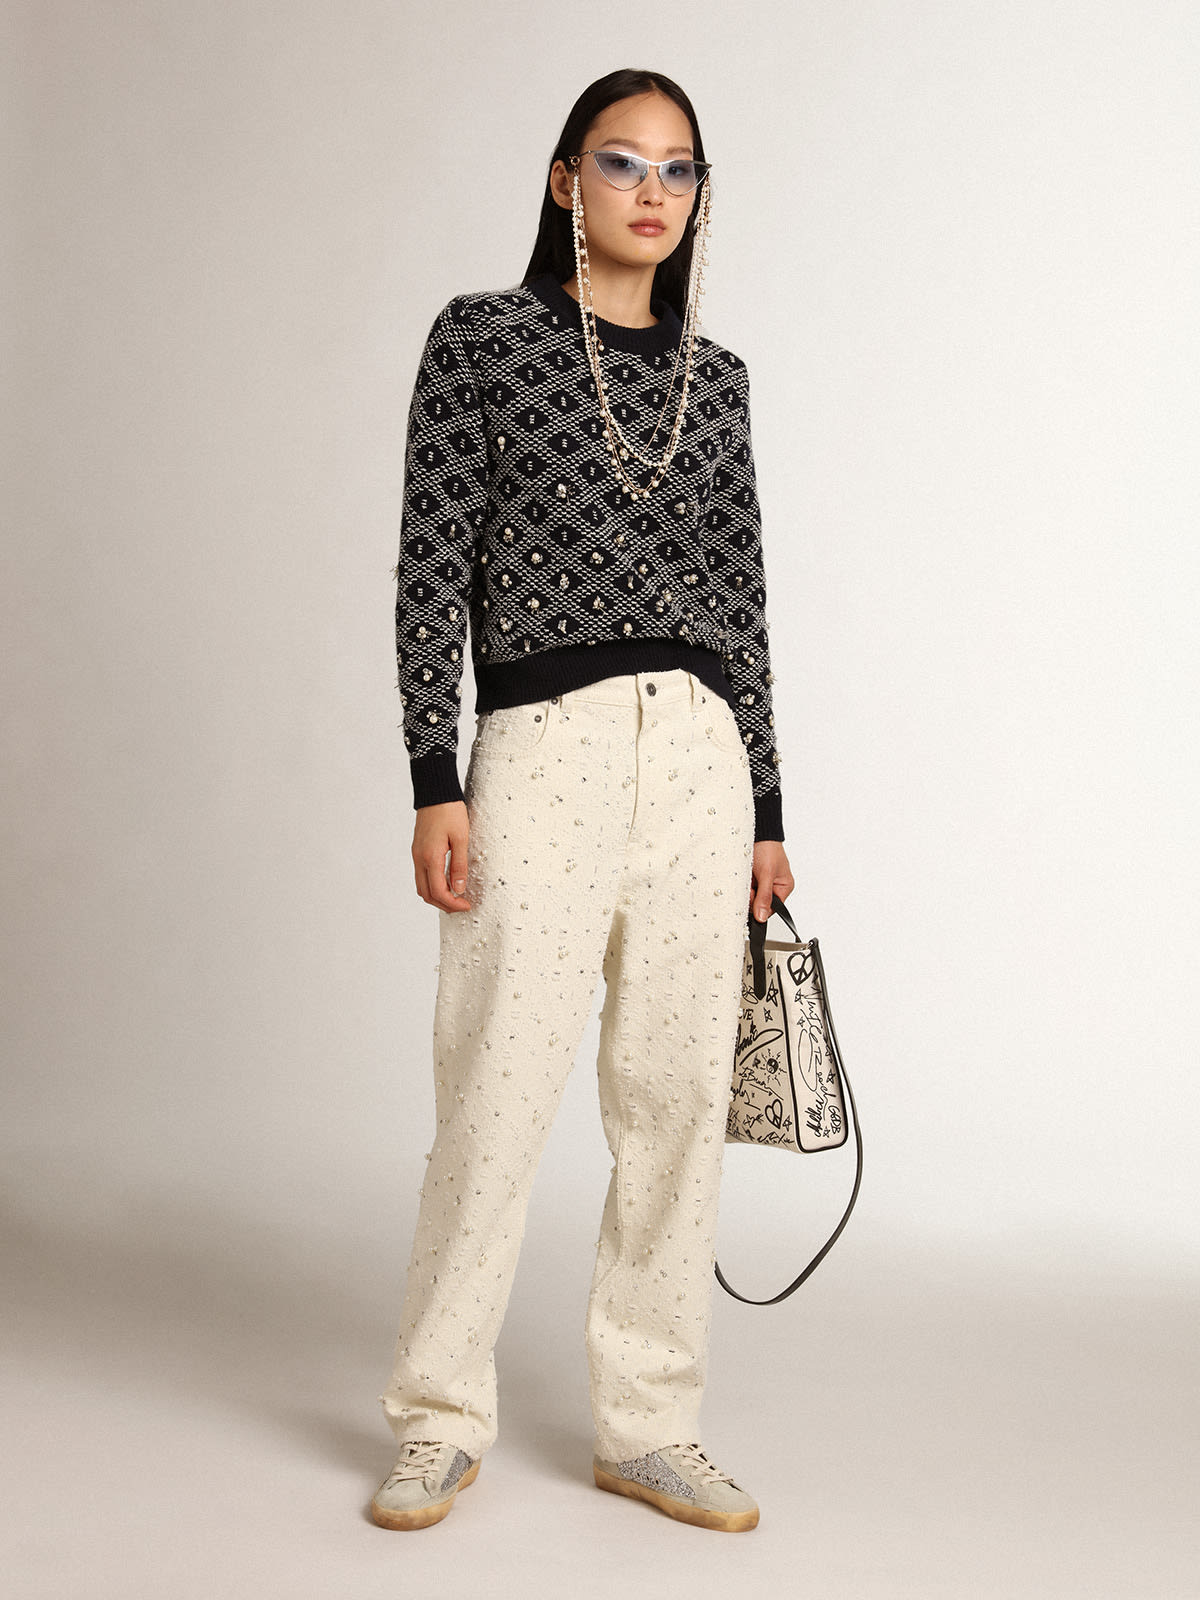 Golden Goose - Journey Collection Kim jeans in off-white cotton with diamond patterns and the addition of beads and crystals in 